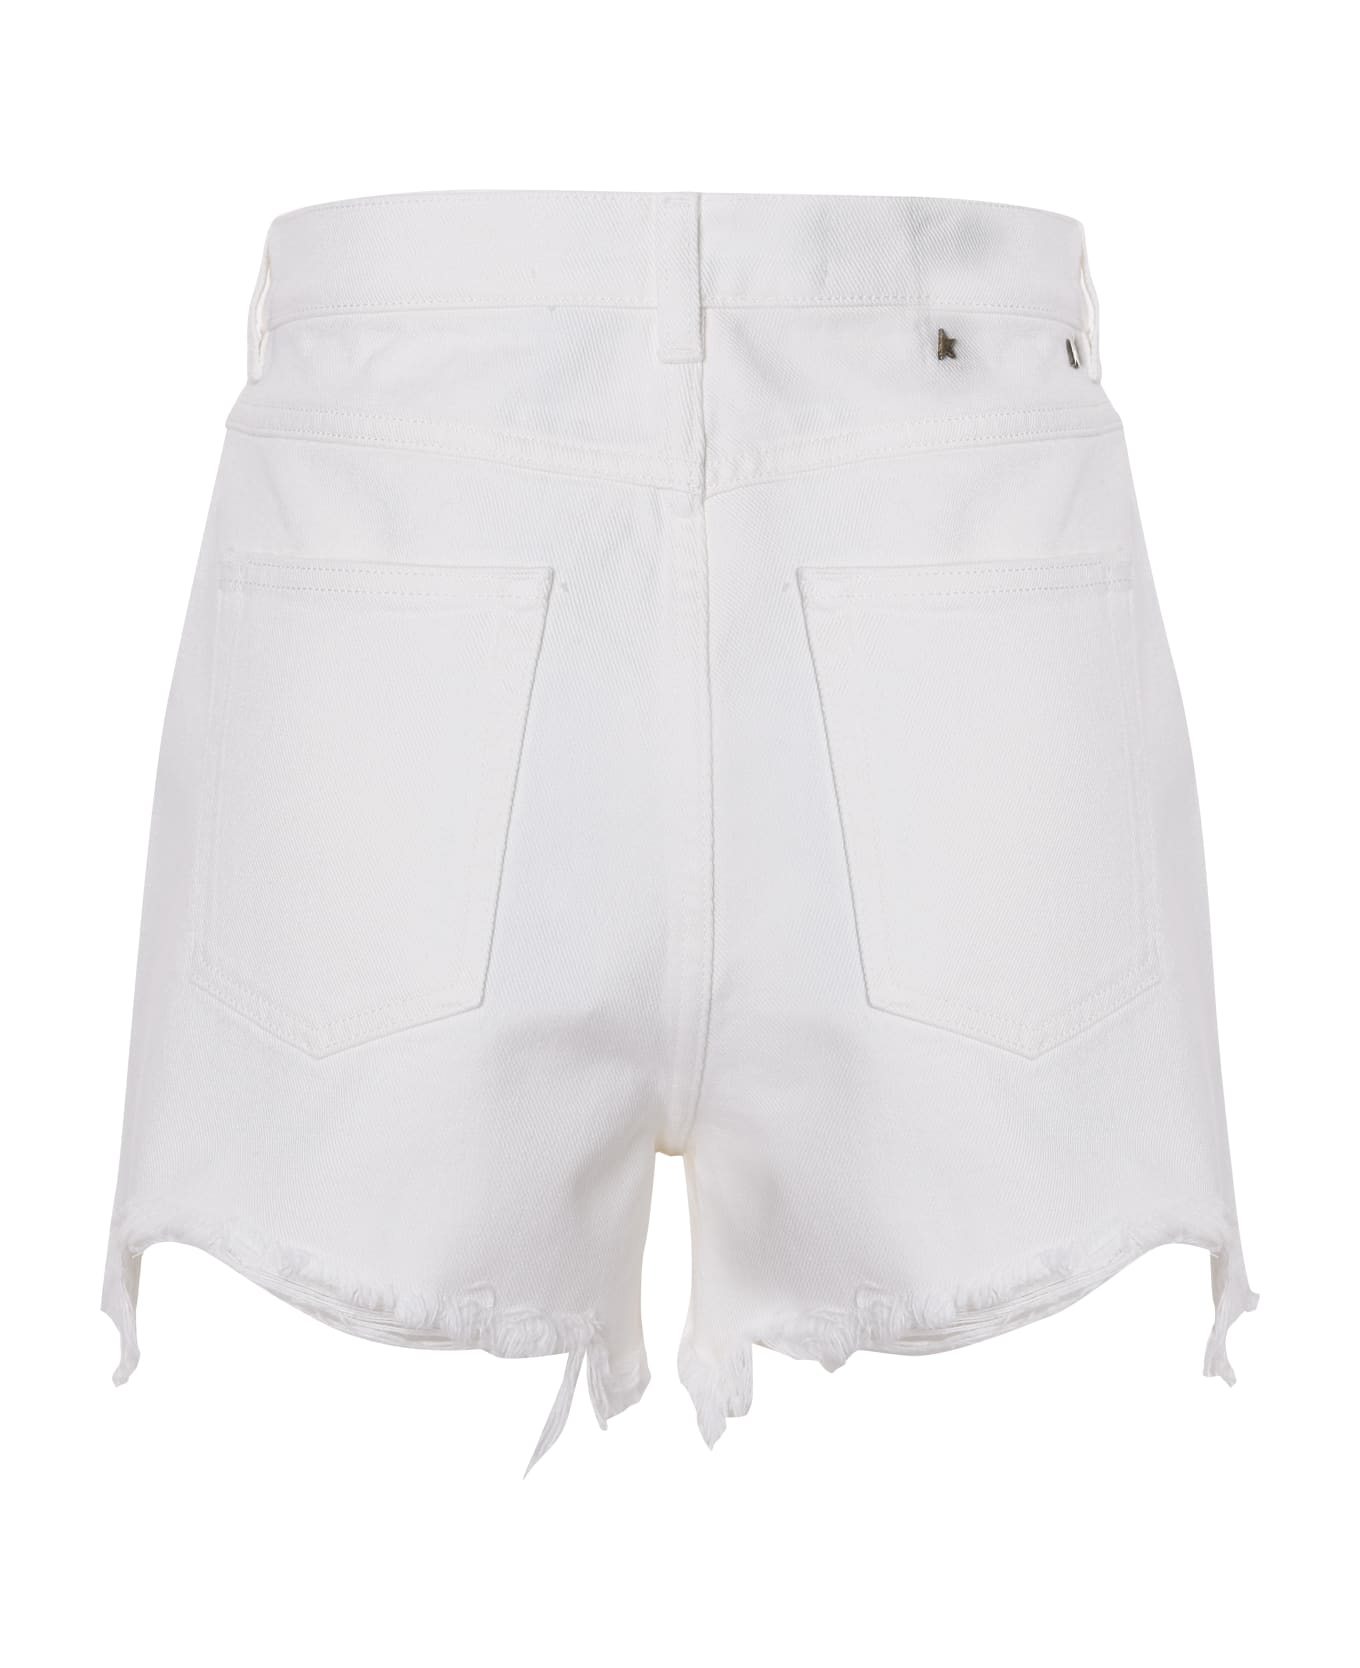 Golden Goose Shorts With Rips - Offwhite ショートパンツ